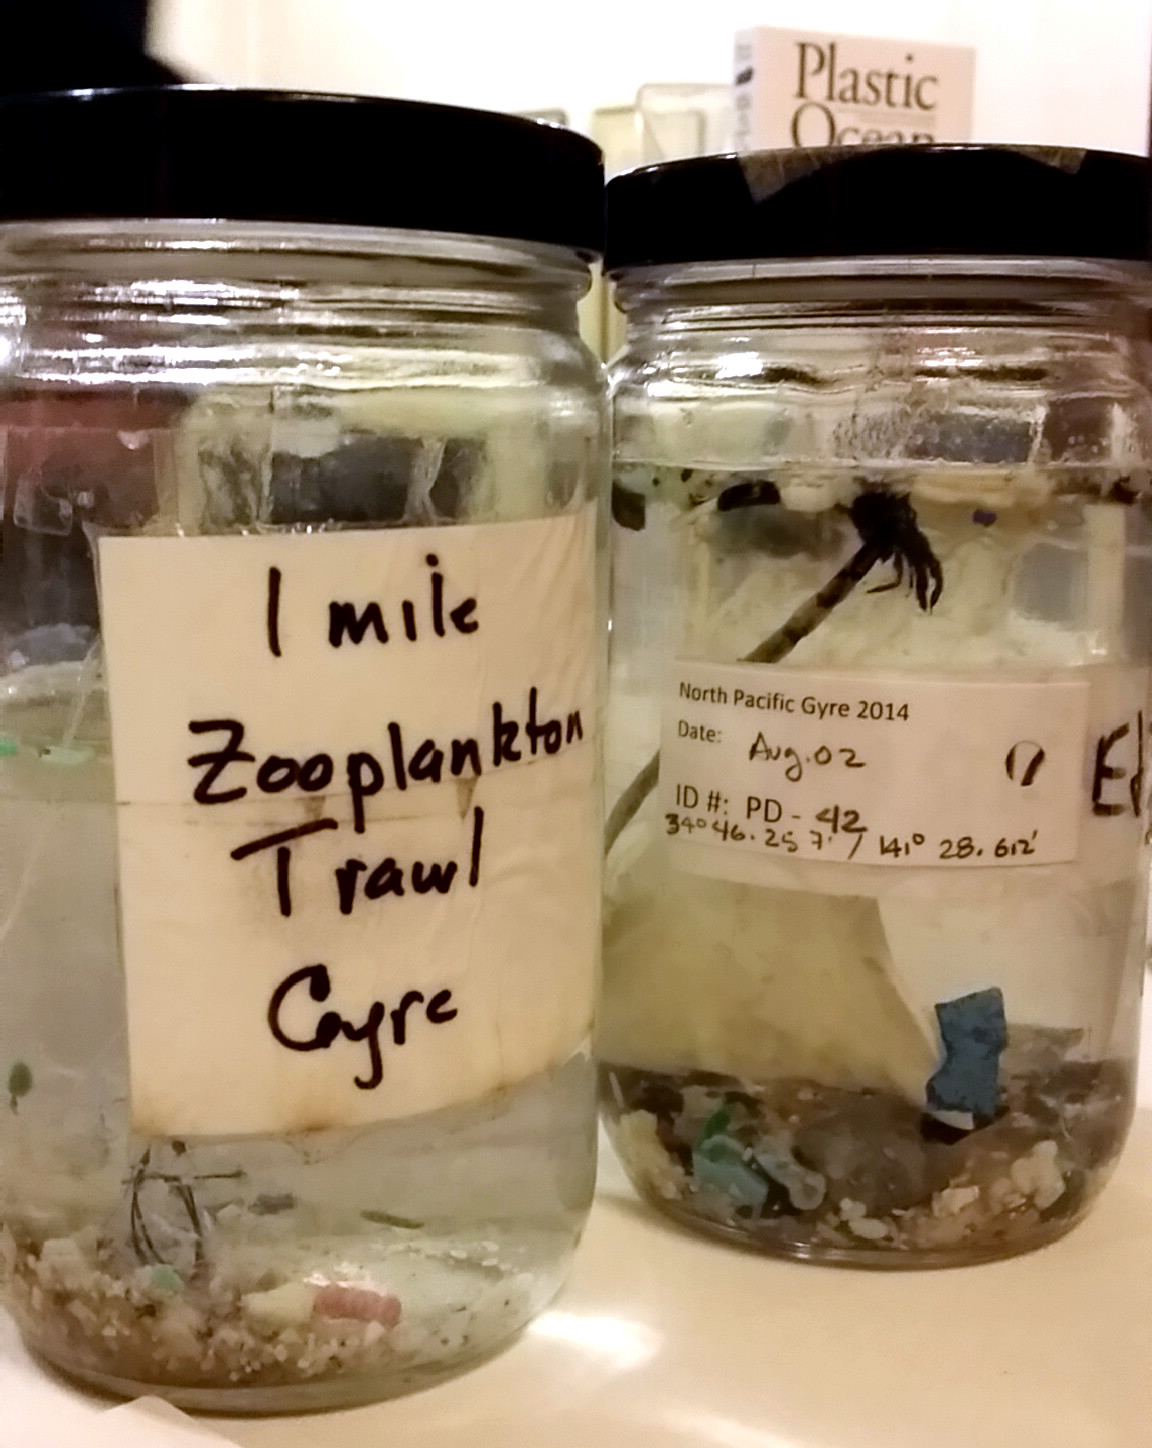 North Pacific Gyre samples